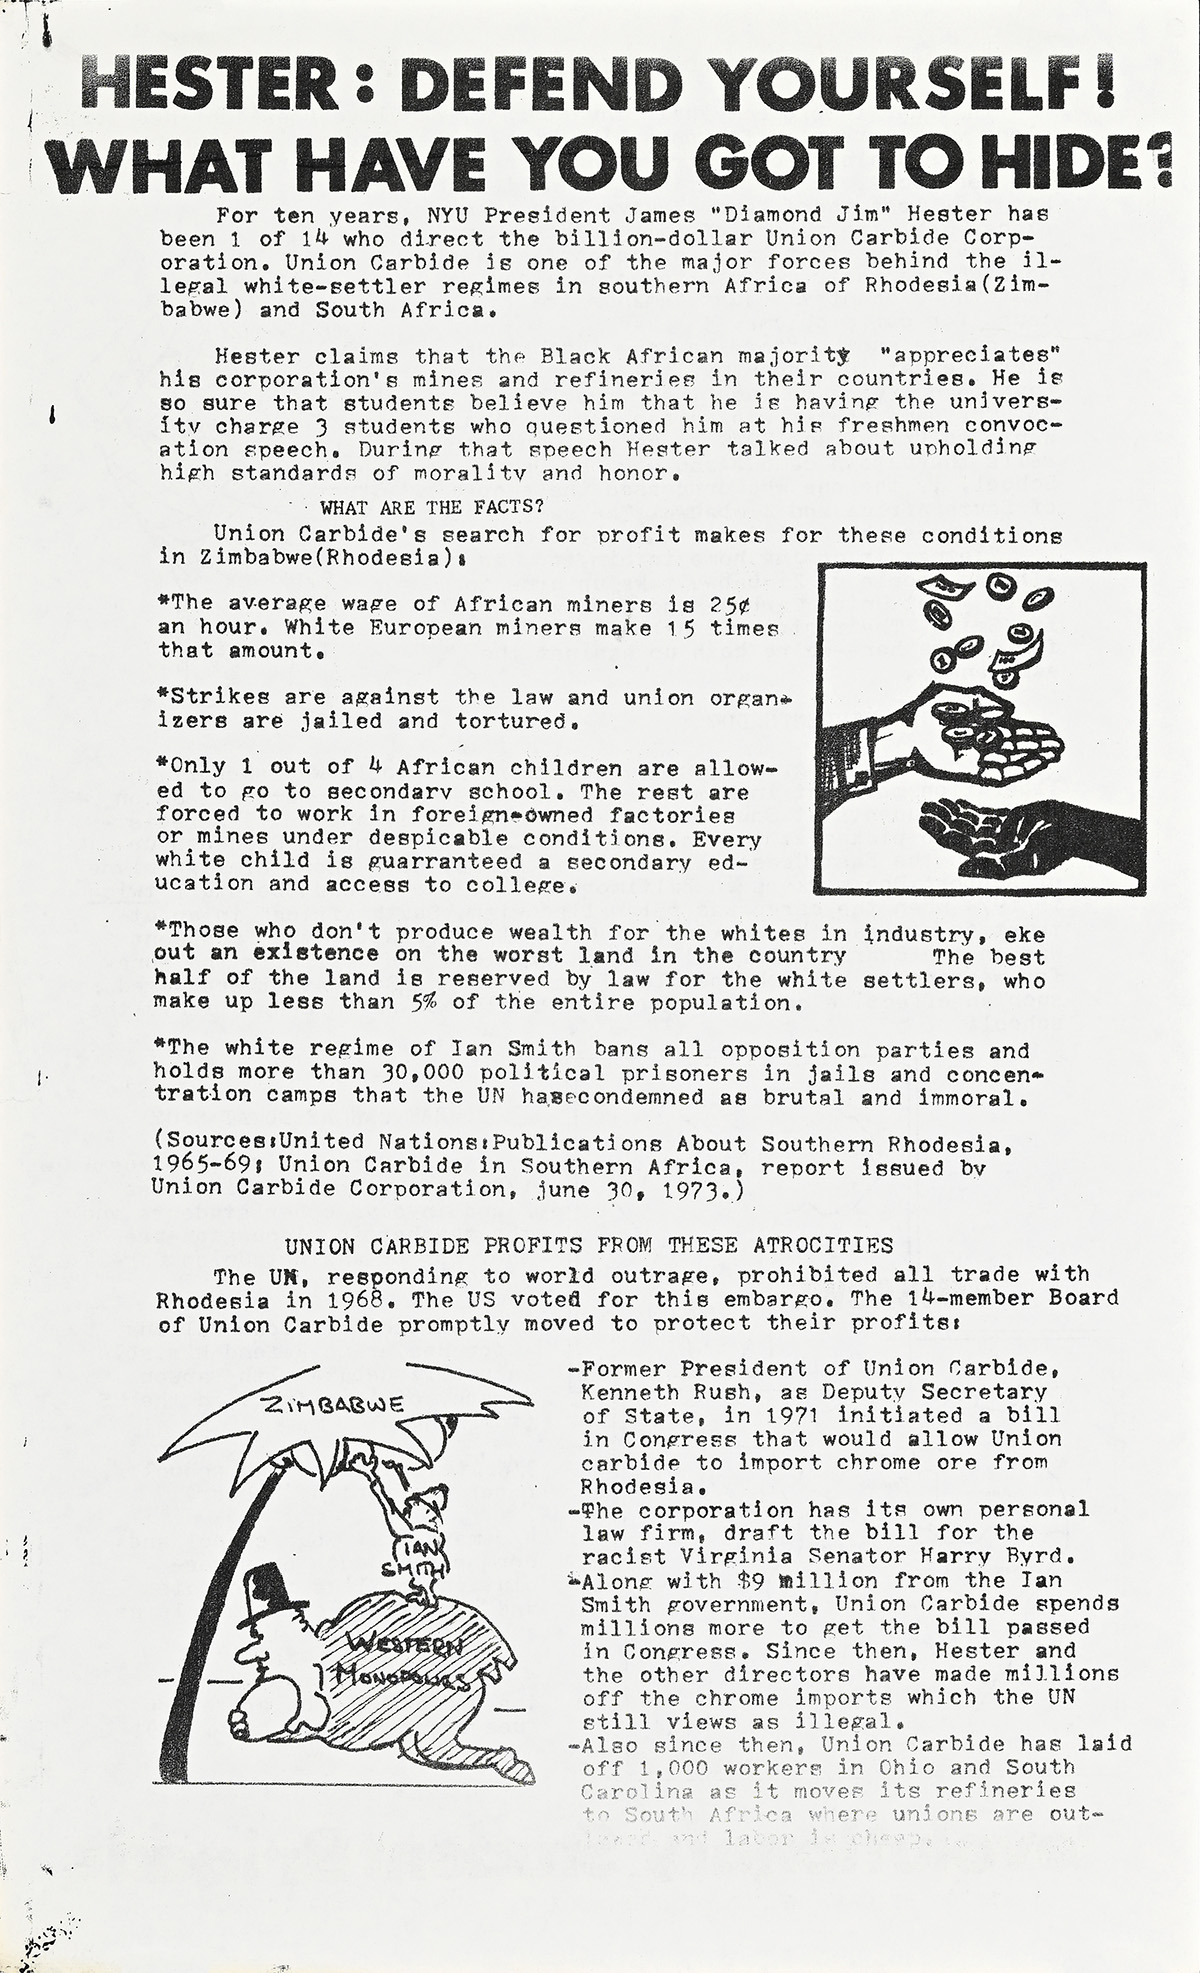 A broadside with text and 2 images of a white person taking money from a Black man and food from a Zimbabwe tree.